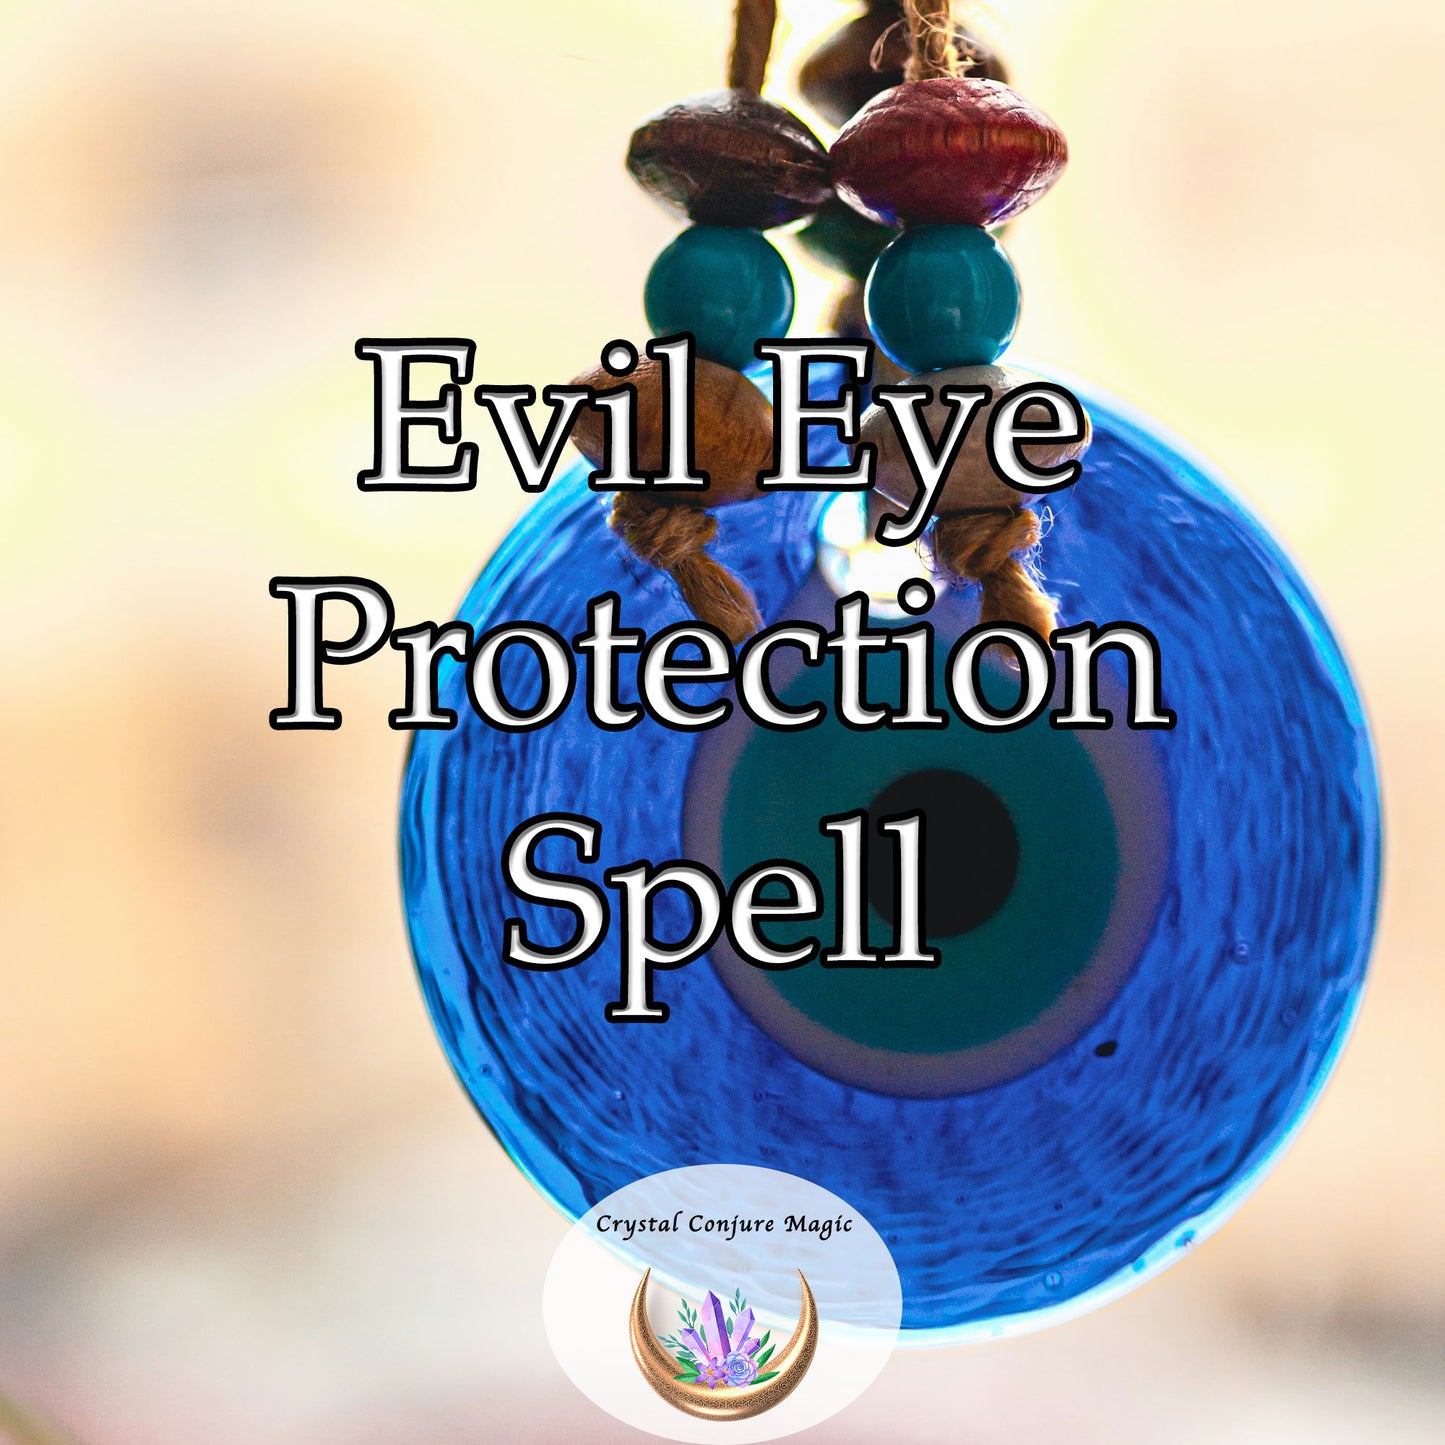 Evil Eye Protection Spell - an invisible shield, warding off negative energies and ill-intentioned thoughts